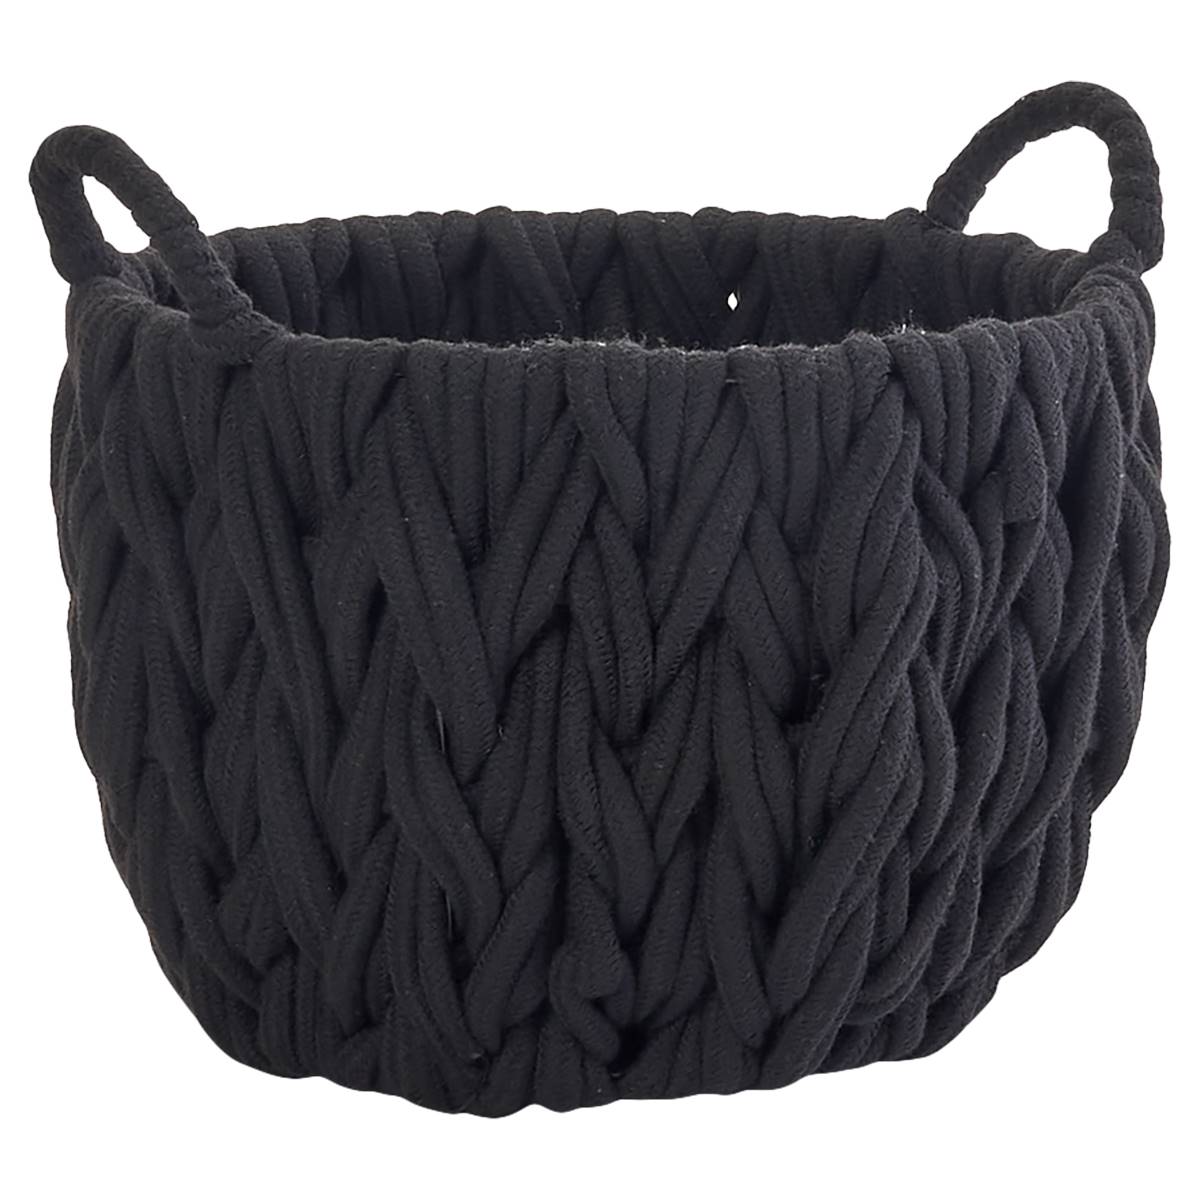 Extra Small Black Braided Round Chunky Cotton Rope Basket